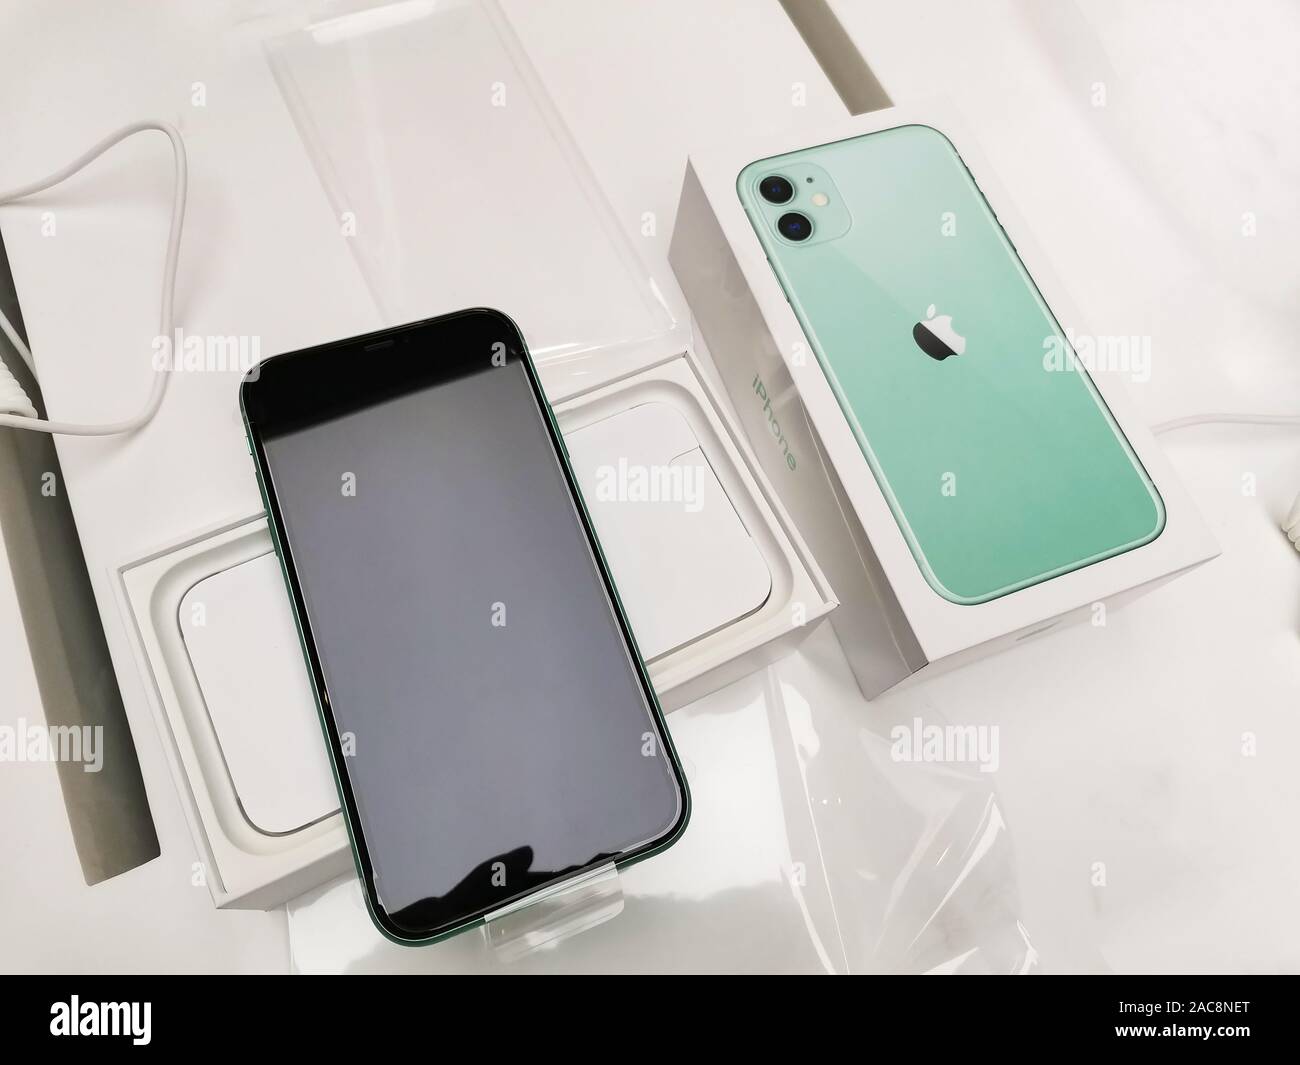 Bangkok, Thailand - November 30, 2019 : Smartphone New iPhone 11 green  color and package box modern 2019 mobile phones / Buy a new mobile phone  concep Stock Photo - Alamy